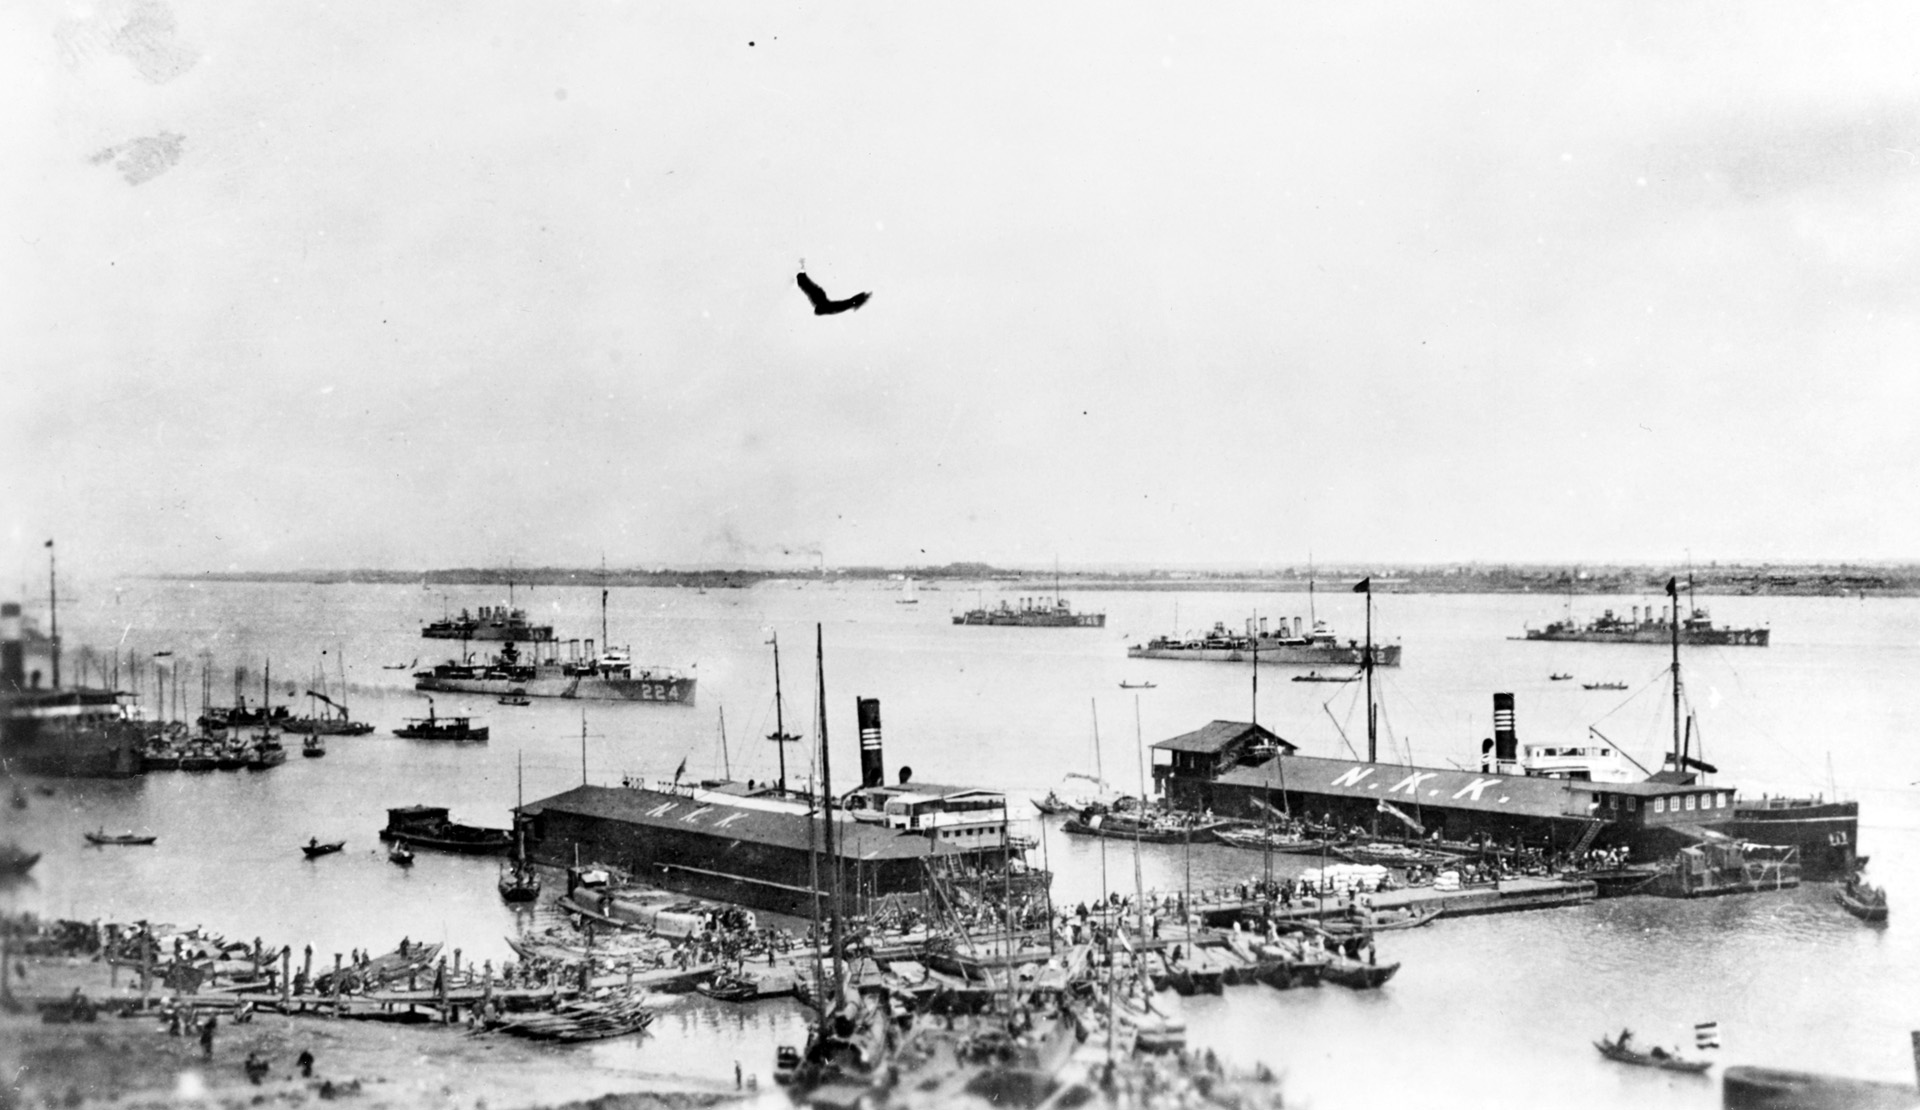 The U.S. Navy’s Asiatic Fleet off the harbor of Hankow, China, in 1923. USS Stewart is recognizable as the larger ship in the middle distance of this photograph. 